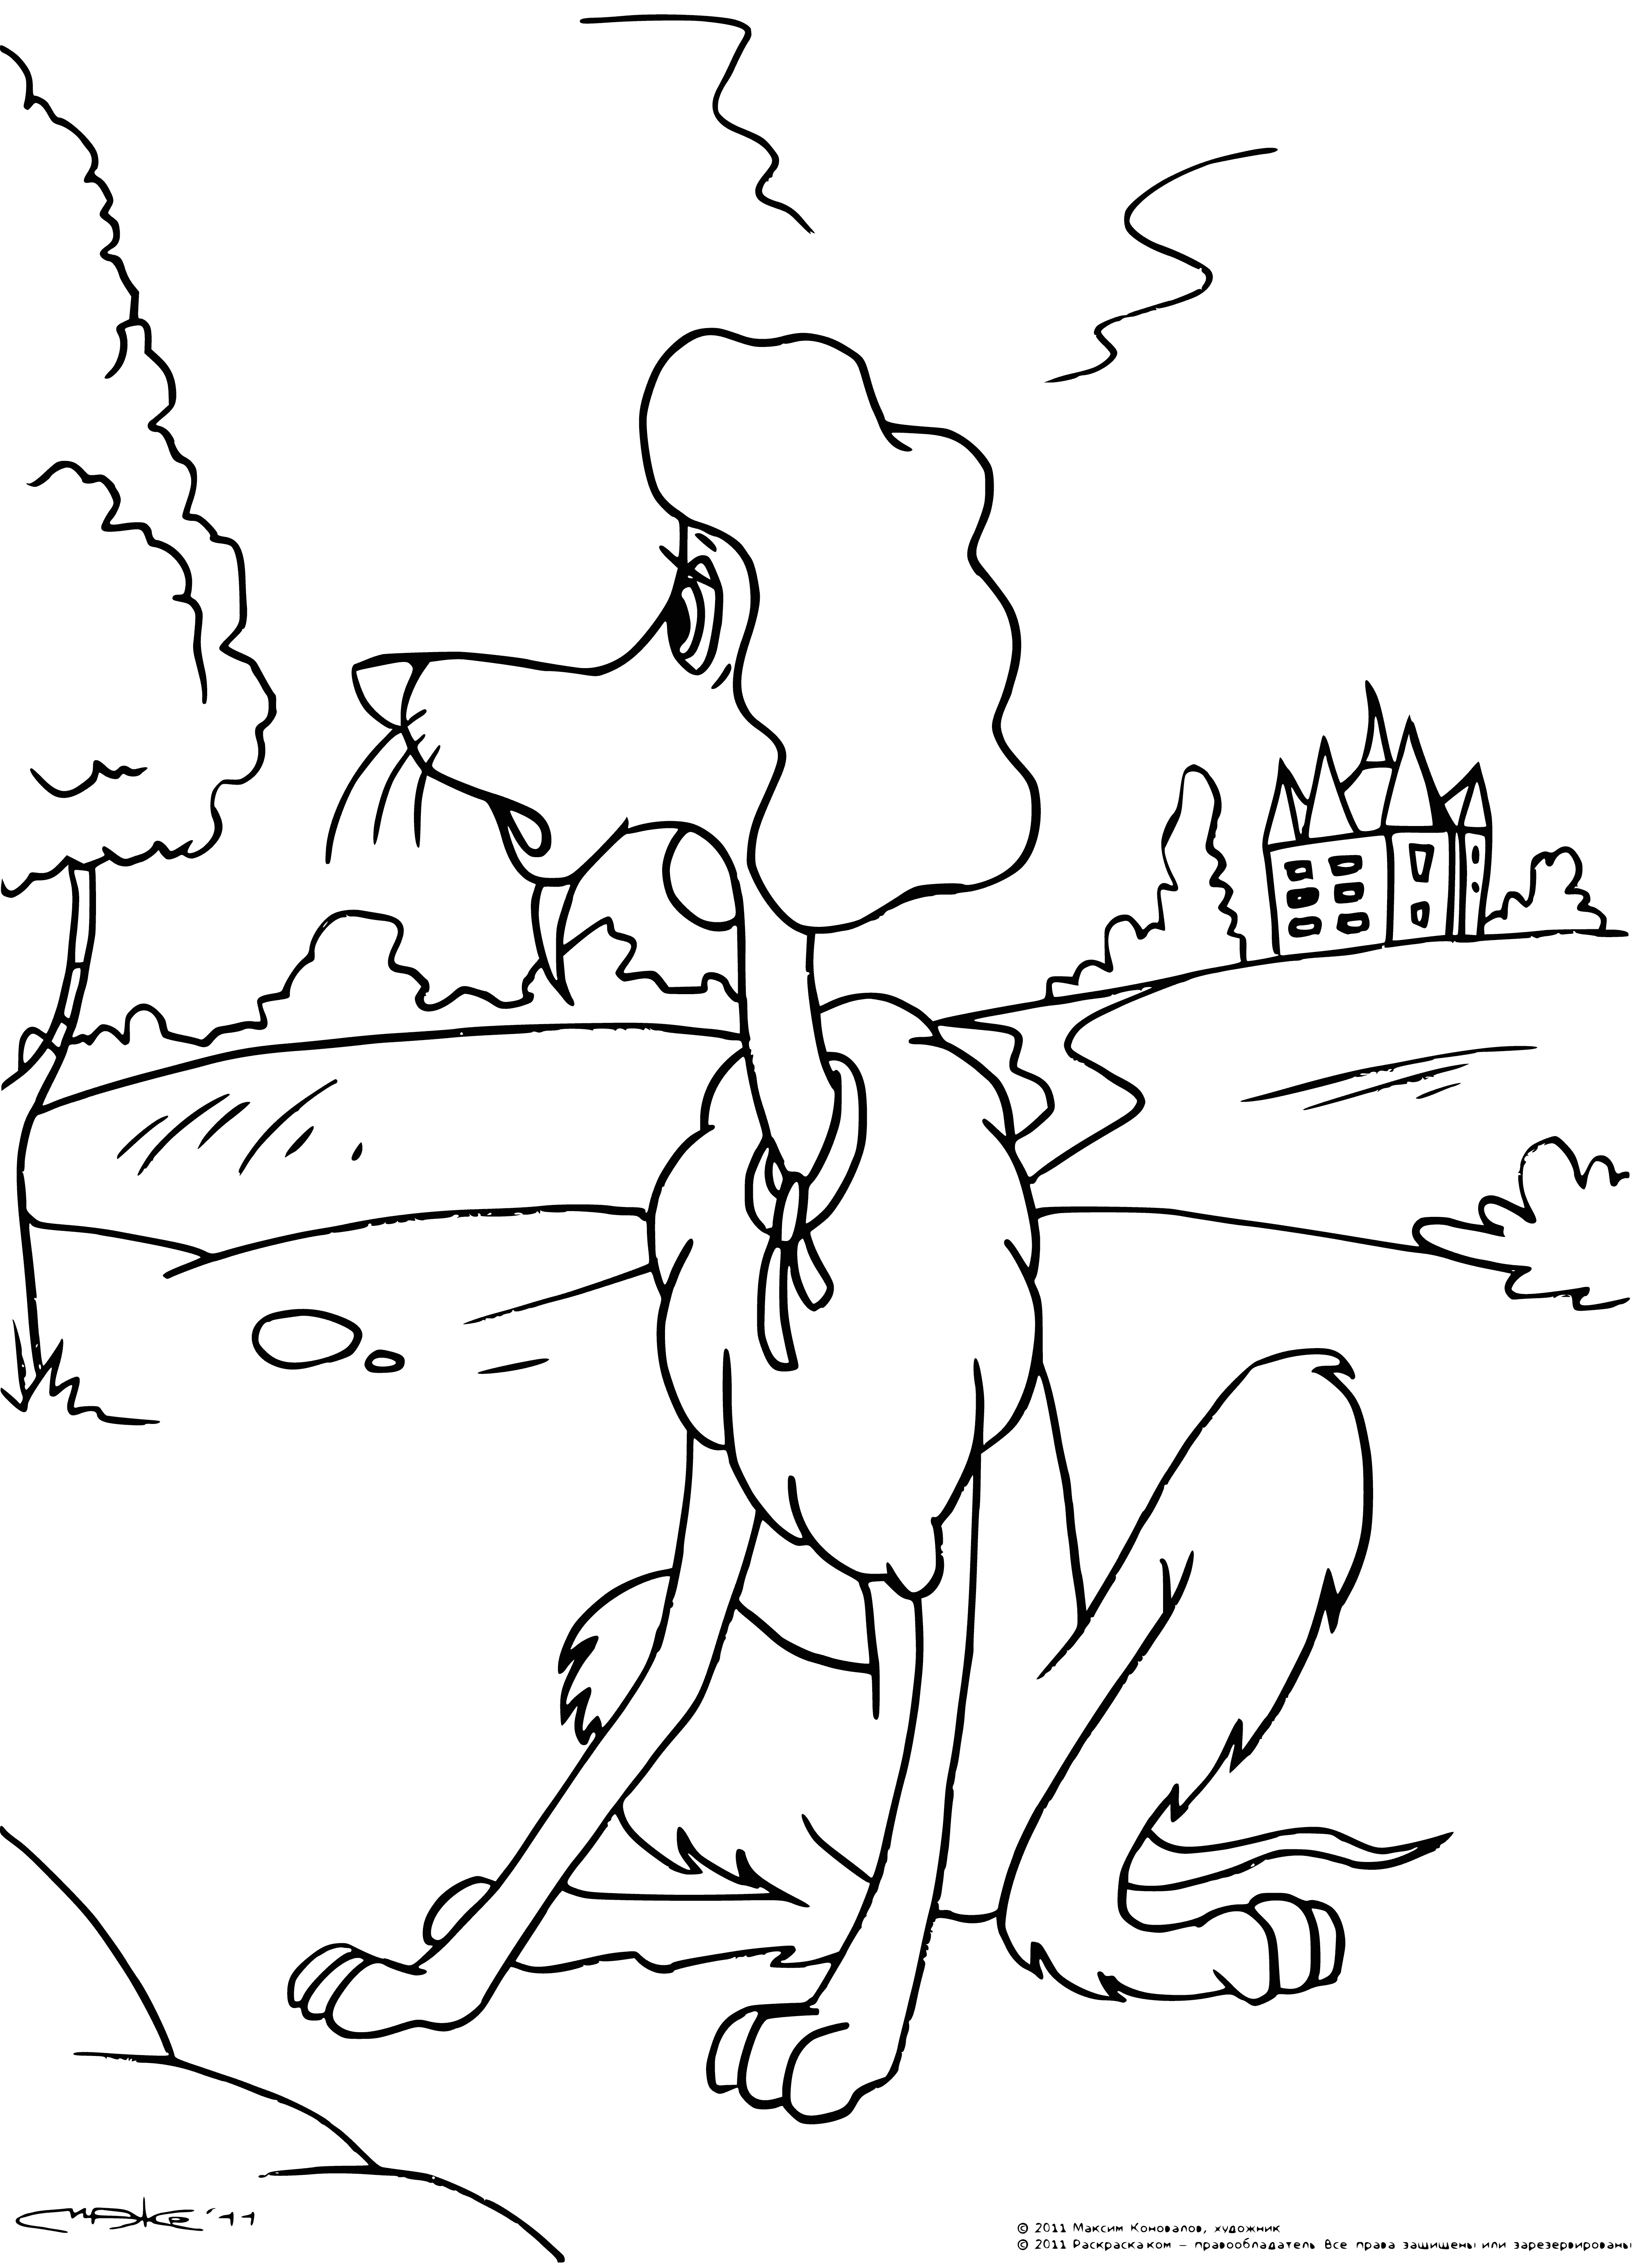 coloring page: Big dog in tall boots, white and brown fur, ears perked, mouth open, eyes alert.